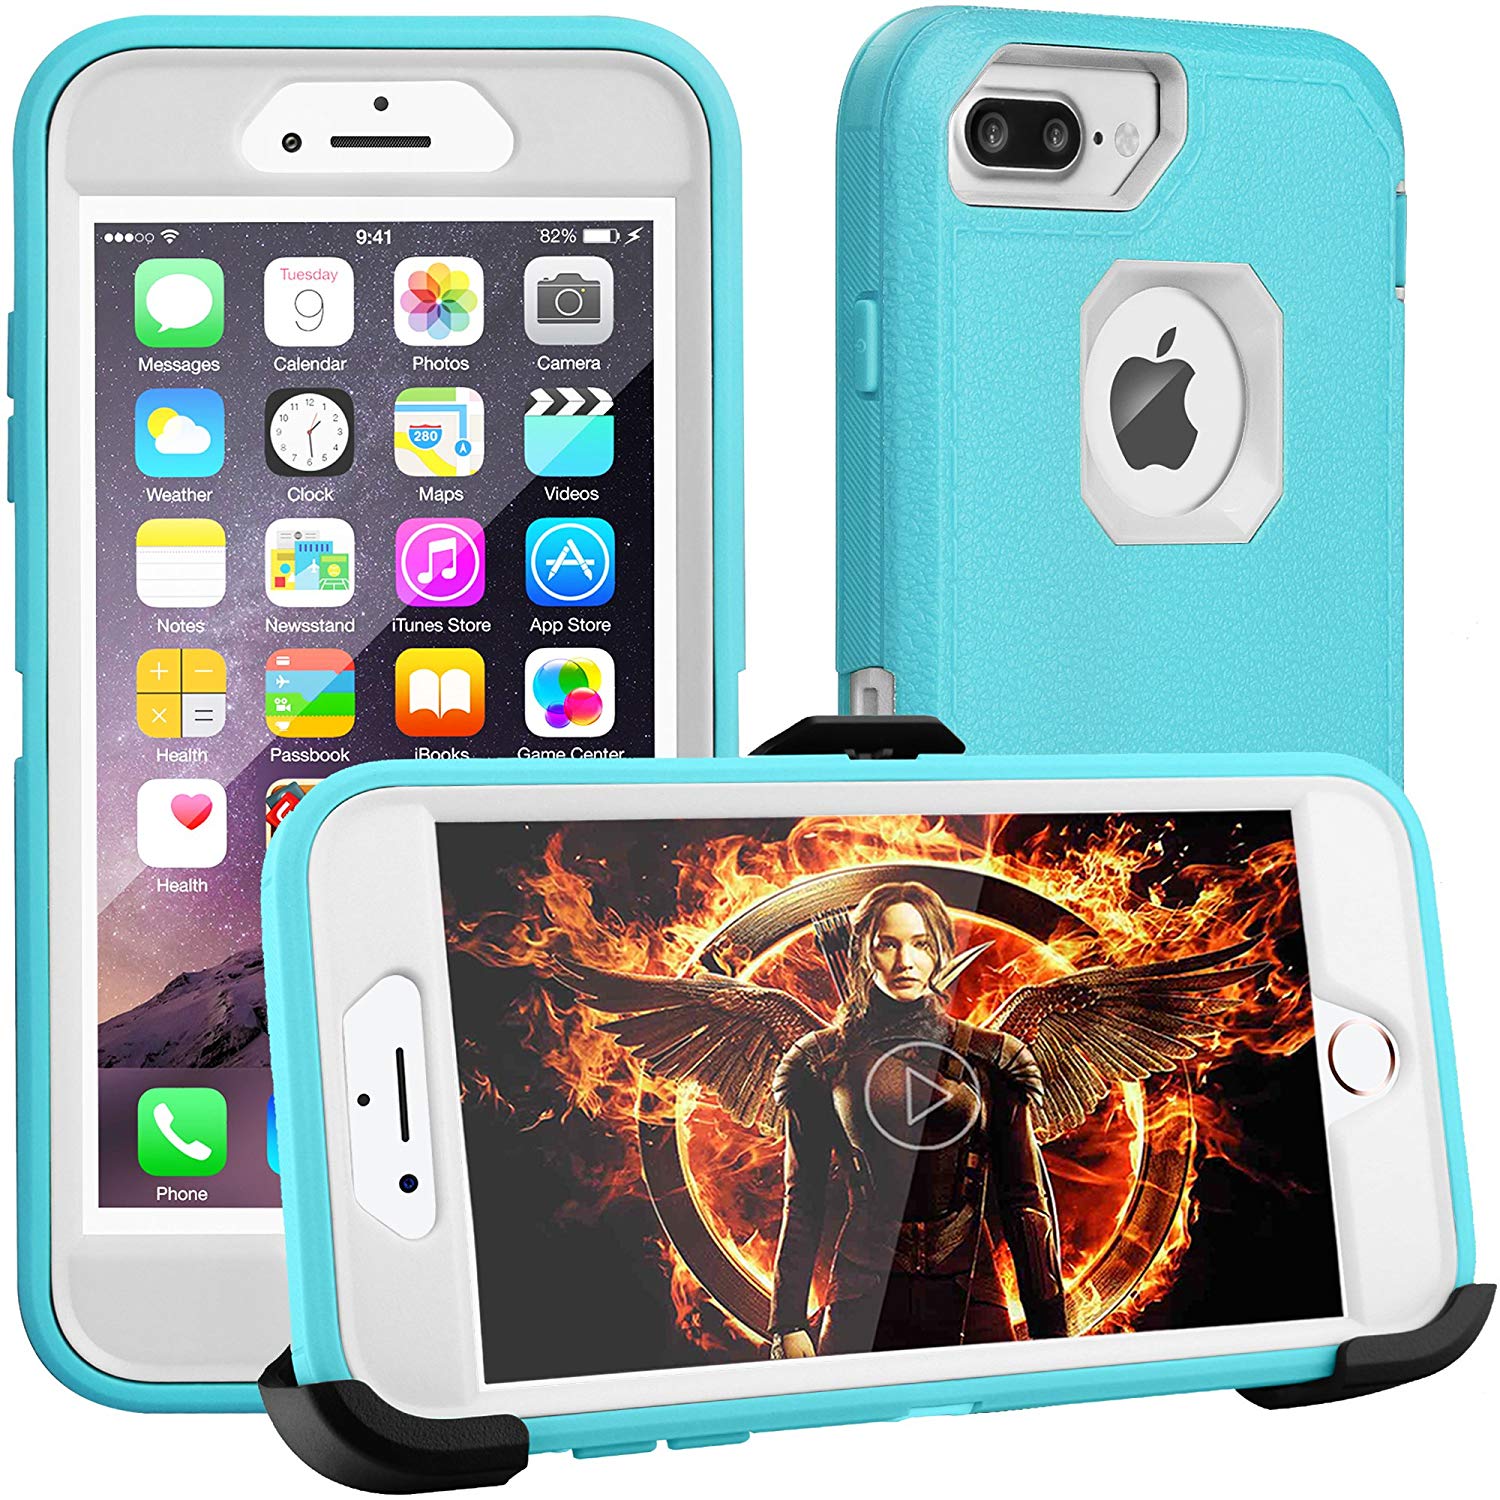 iPhone 8 Plus Case,iPhone 7 Plus Case,iPhone 6s Plus Case,FOGEEK[Dust-Proof]Belt-Clip Heavy Duty Kickstand Cover[Shockproof] PC+TPU for Apple iPhone 7 Plus,iPhone 6/6s Plus(Blue and White) …